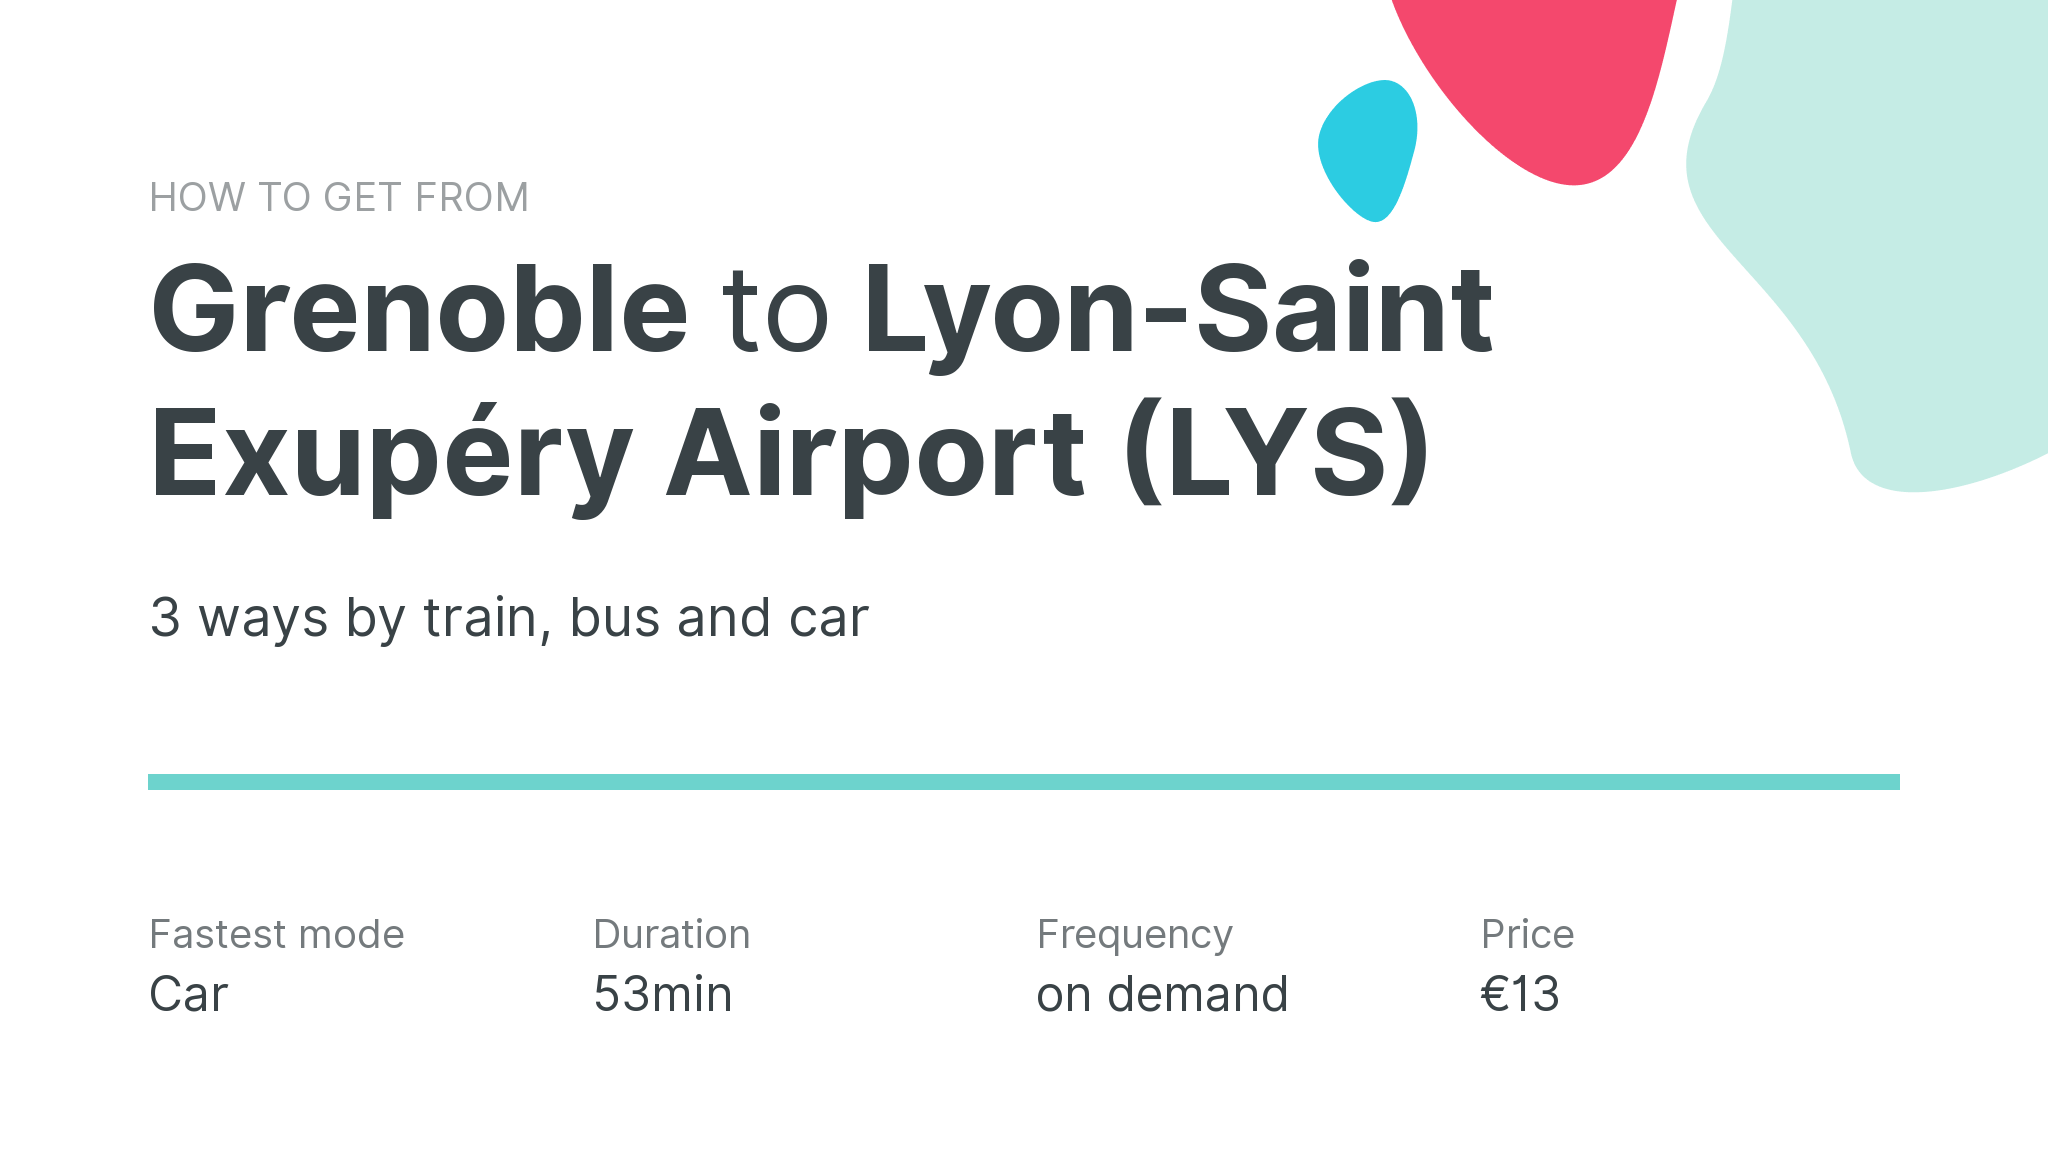 How do I get from Grenoble to Lyon-Saint Exupéry Airport (LYS)